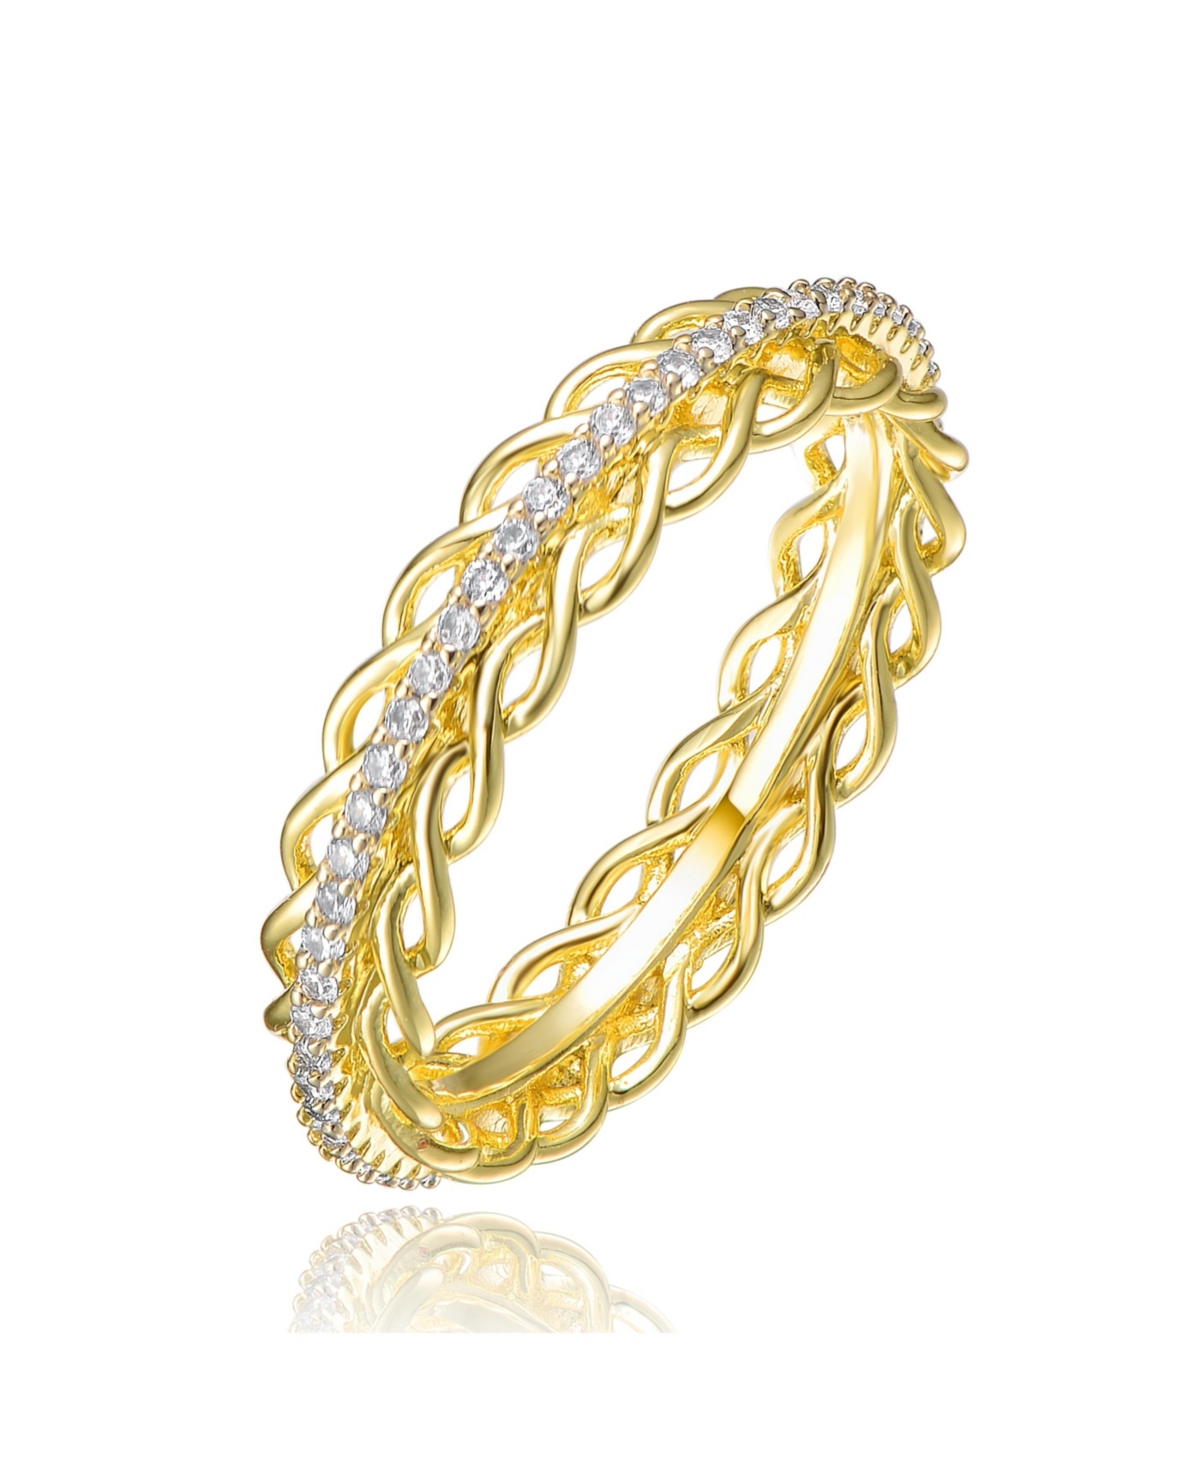 Ra 14K Gold Plated Cubic Zirconia 2 Chain Band Ring - Gold